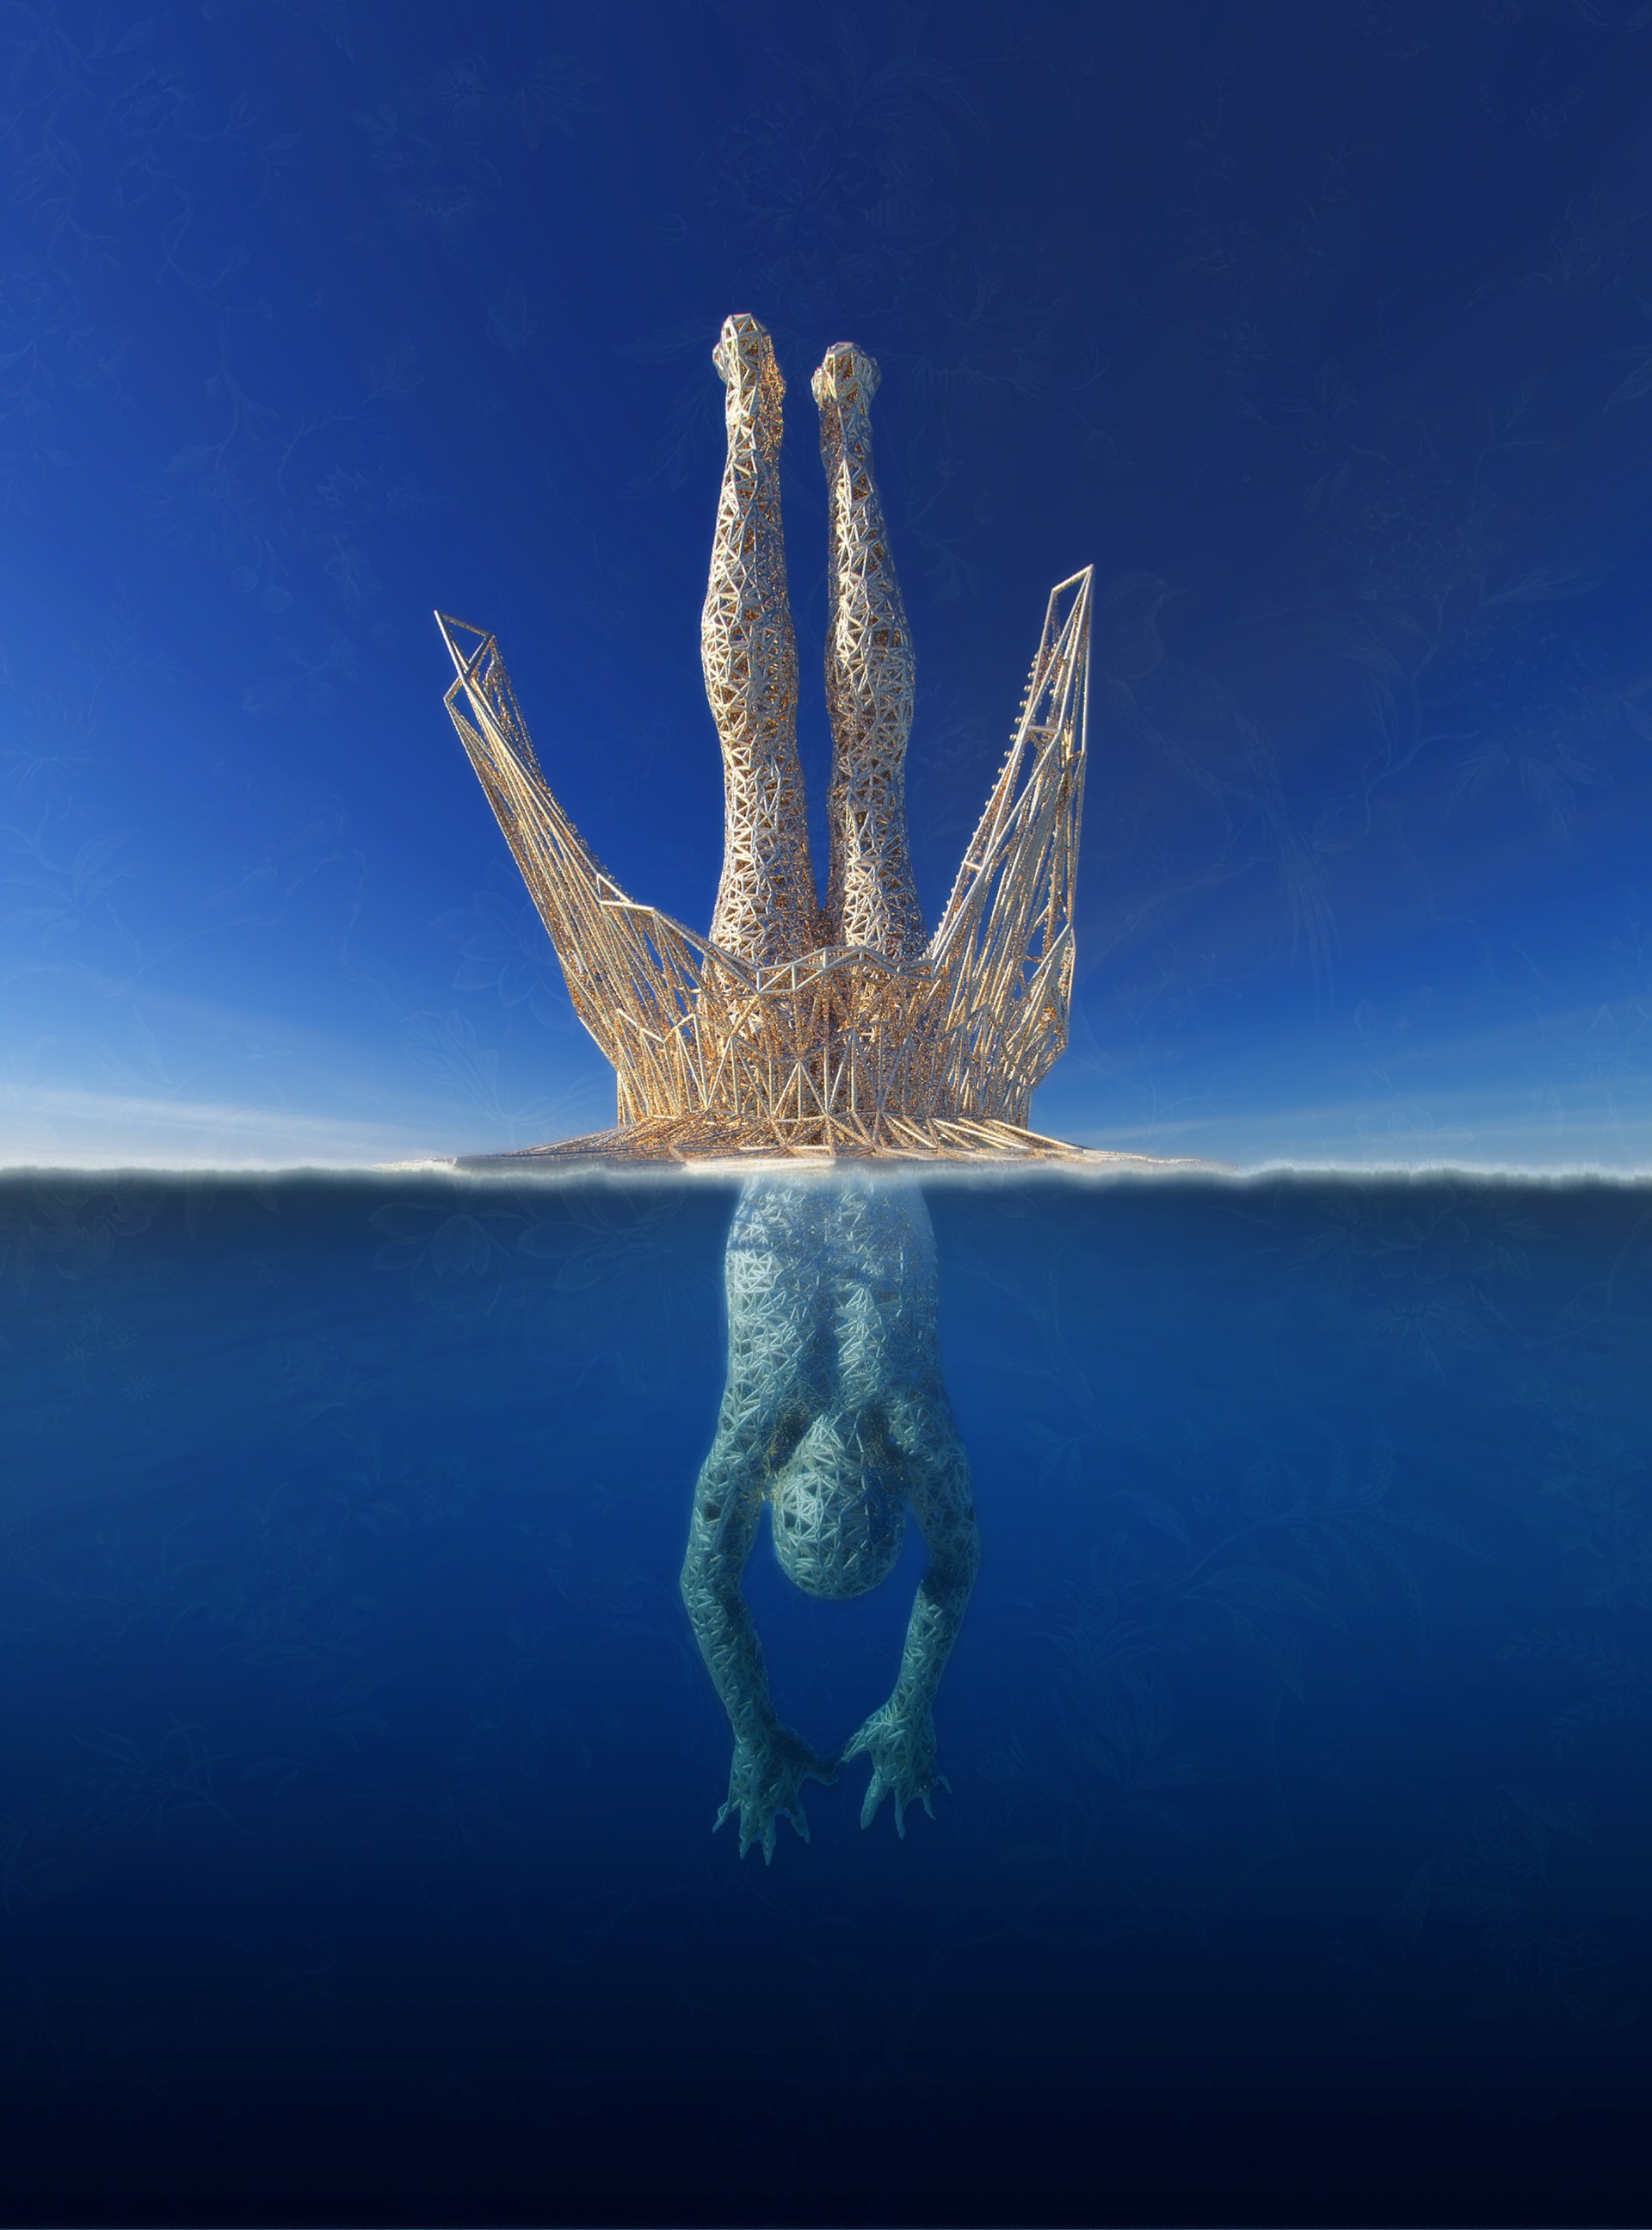 Diver Bottom by Chad Knight